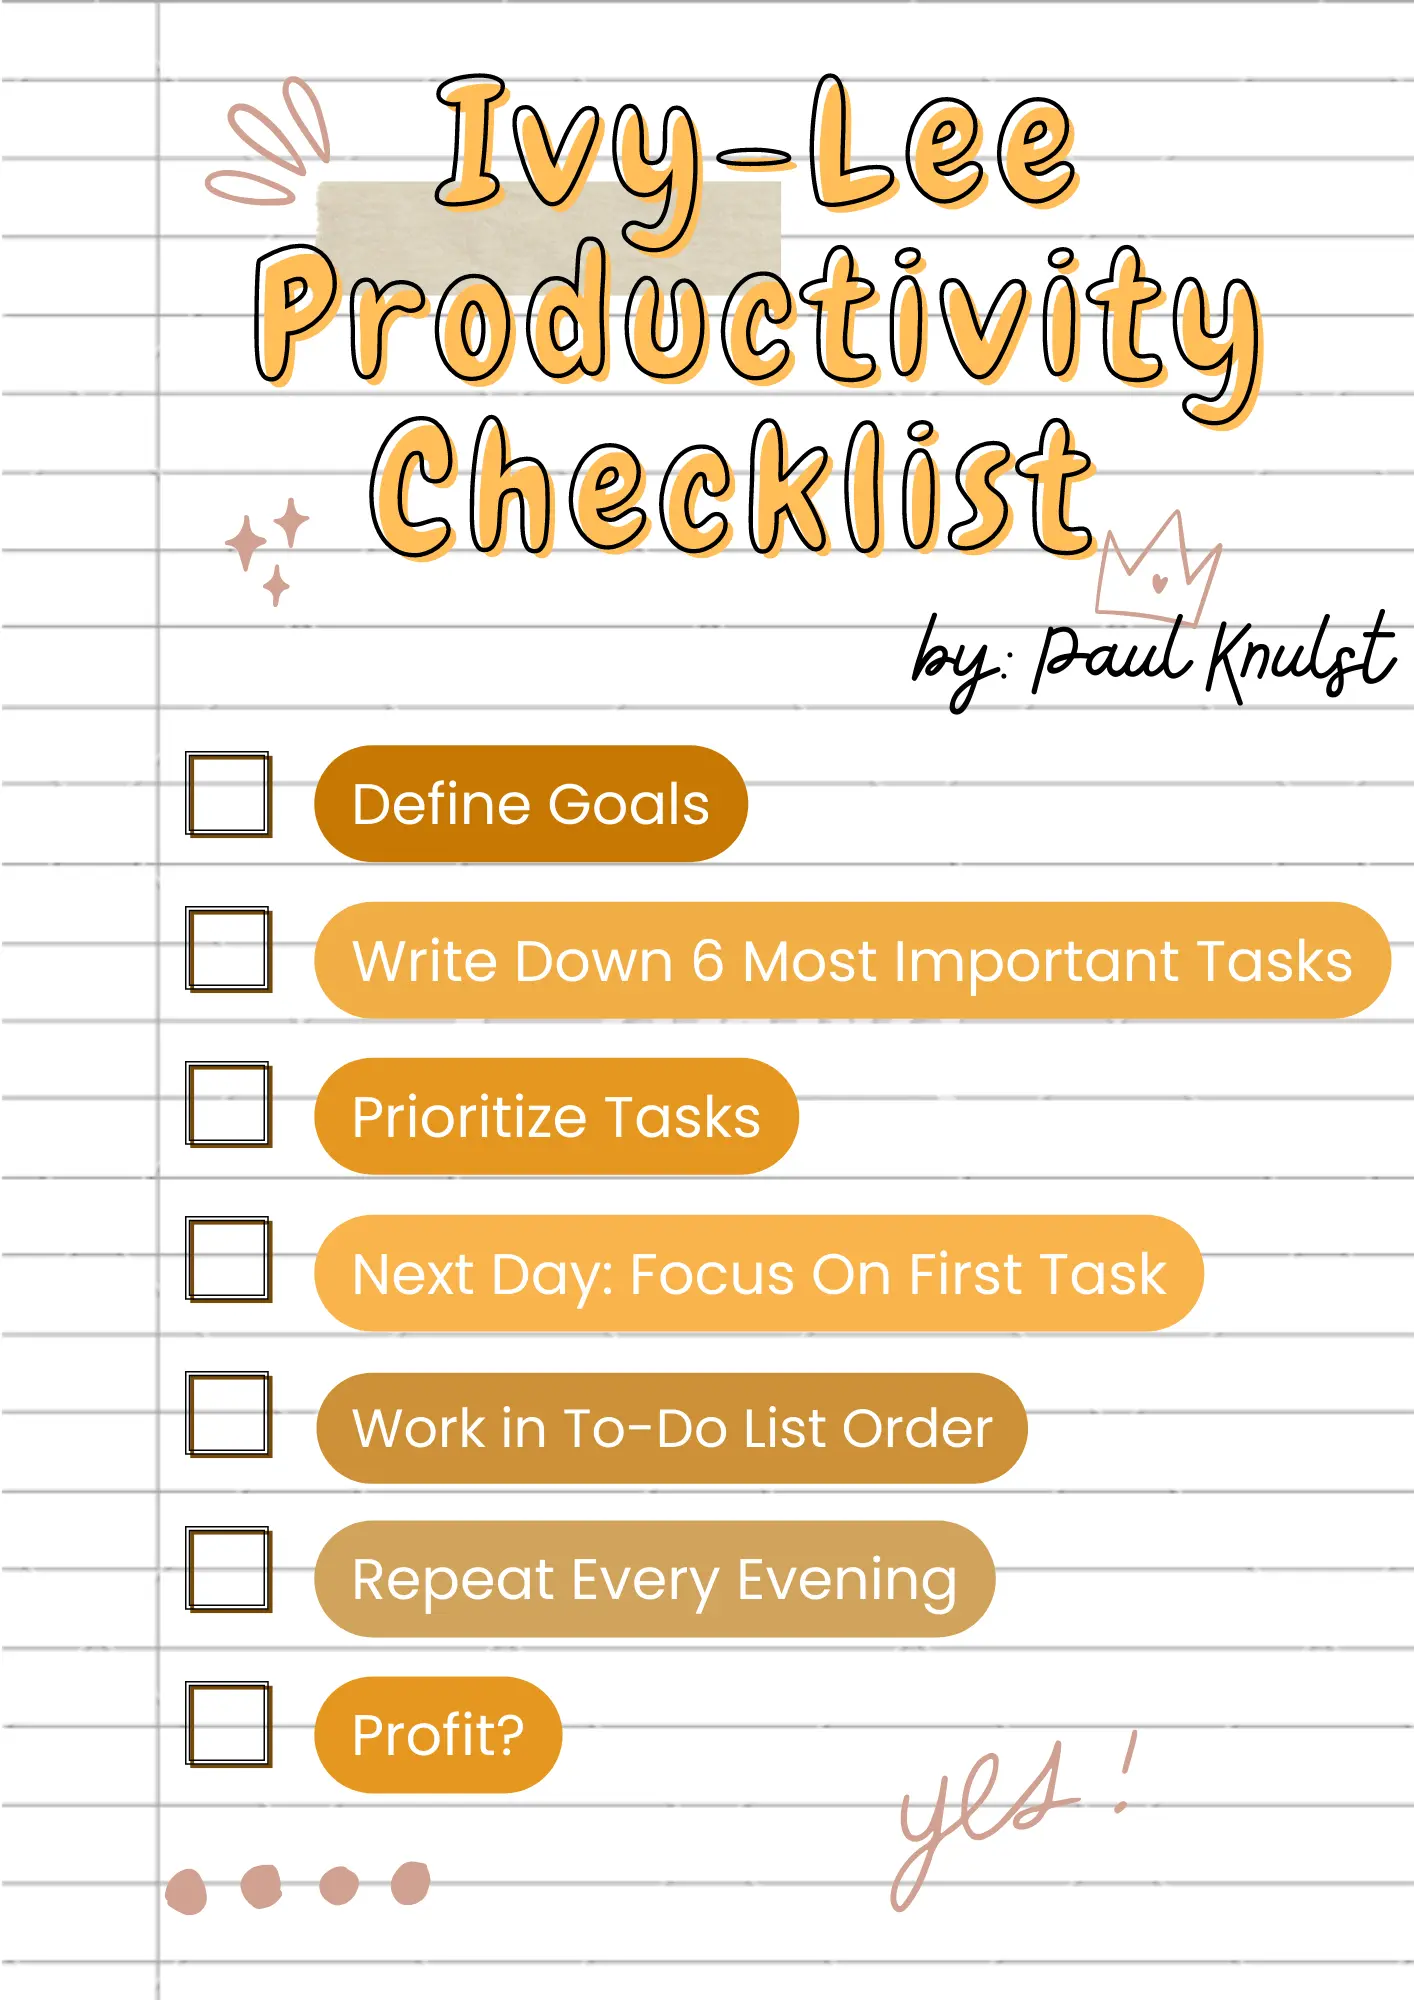 An Ivy-Lee Productivity Checklist for daily work